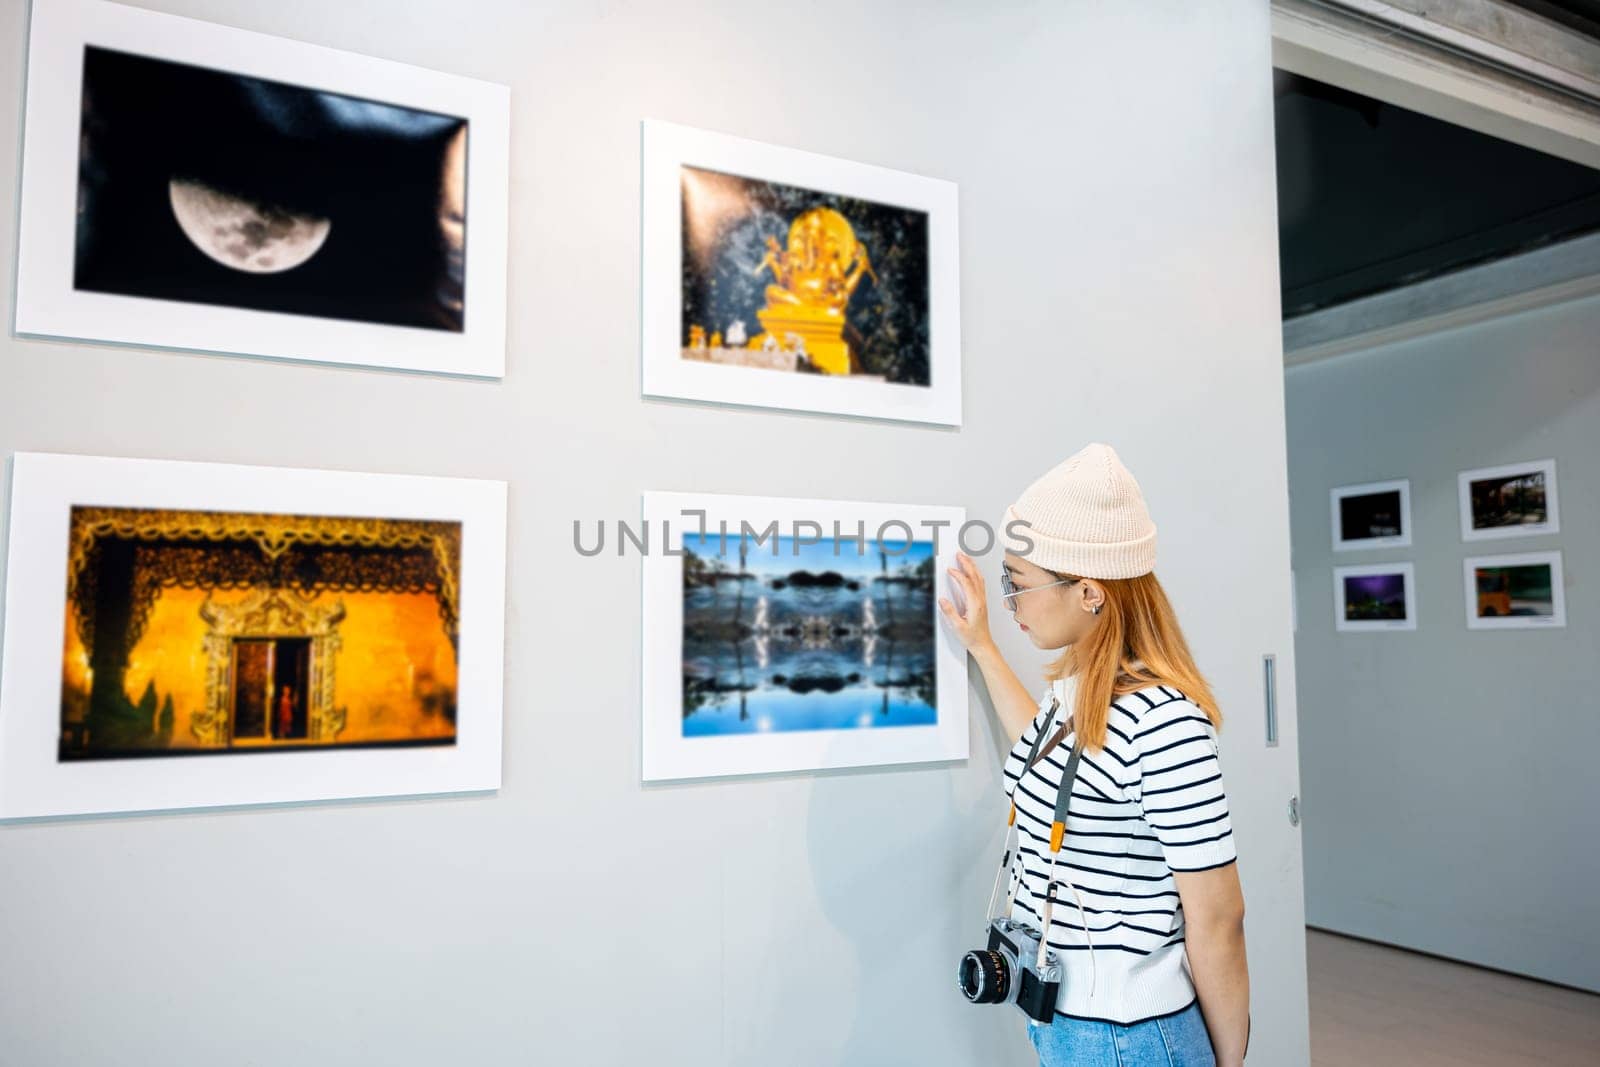 Asian woman hold camera at art gallery collection in front framed paintings pictures on wall and looking, Photographer visit at photo frame to leaning against at show exhibit artwork gallery picture